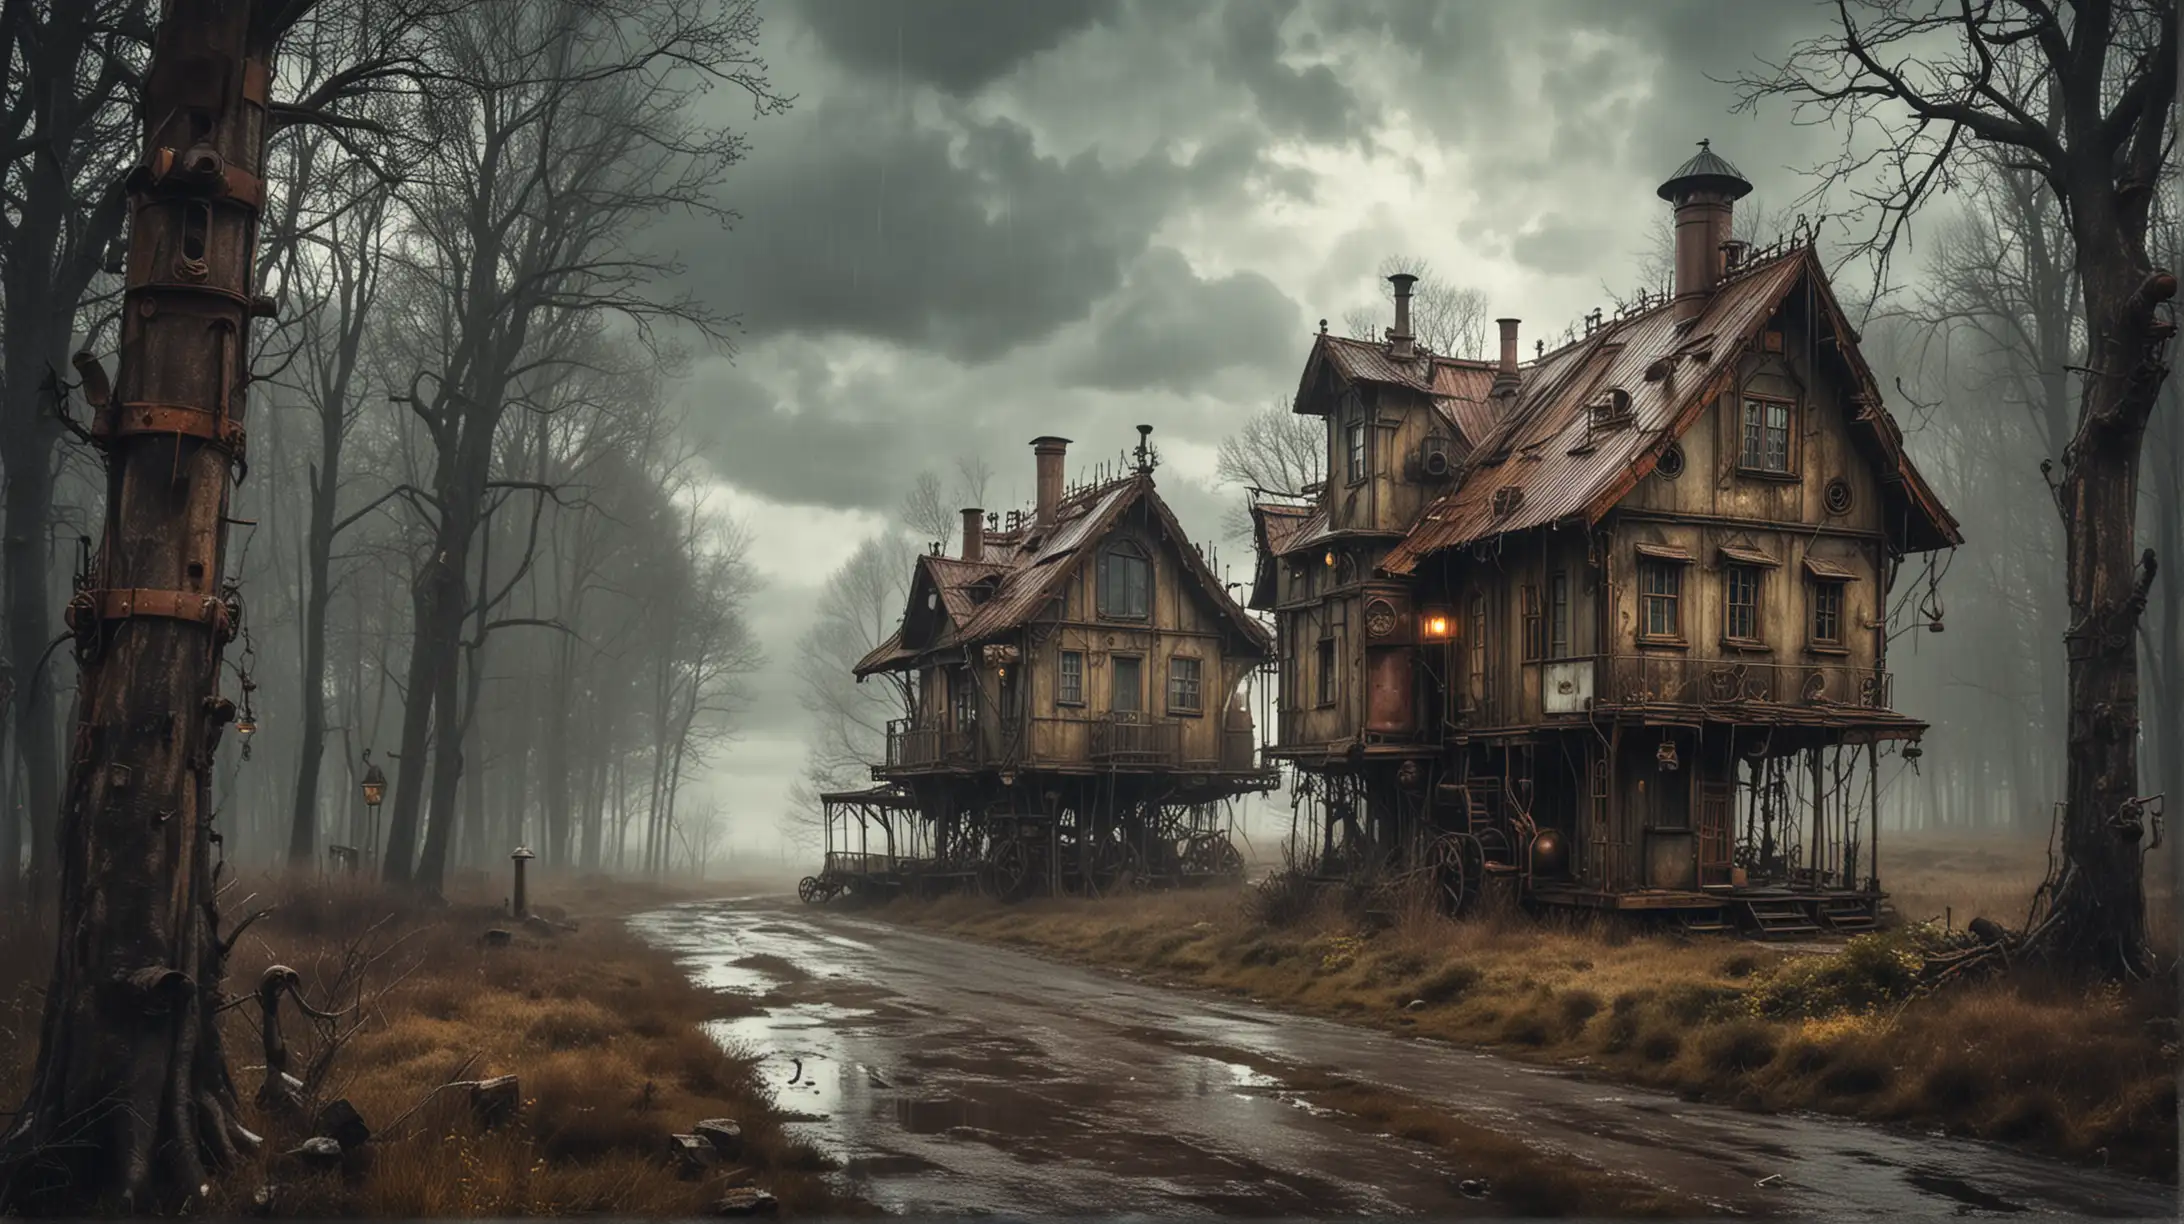 two old steampunk houses on the verge of a forest, stormy weather